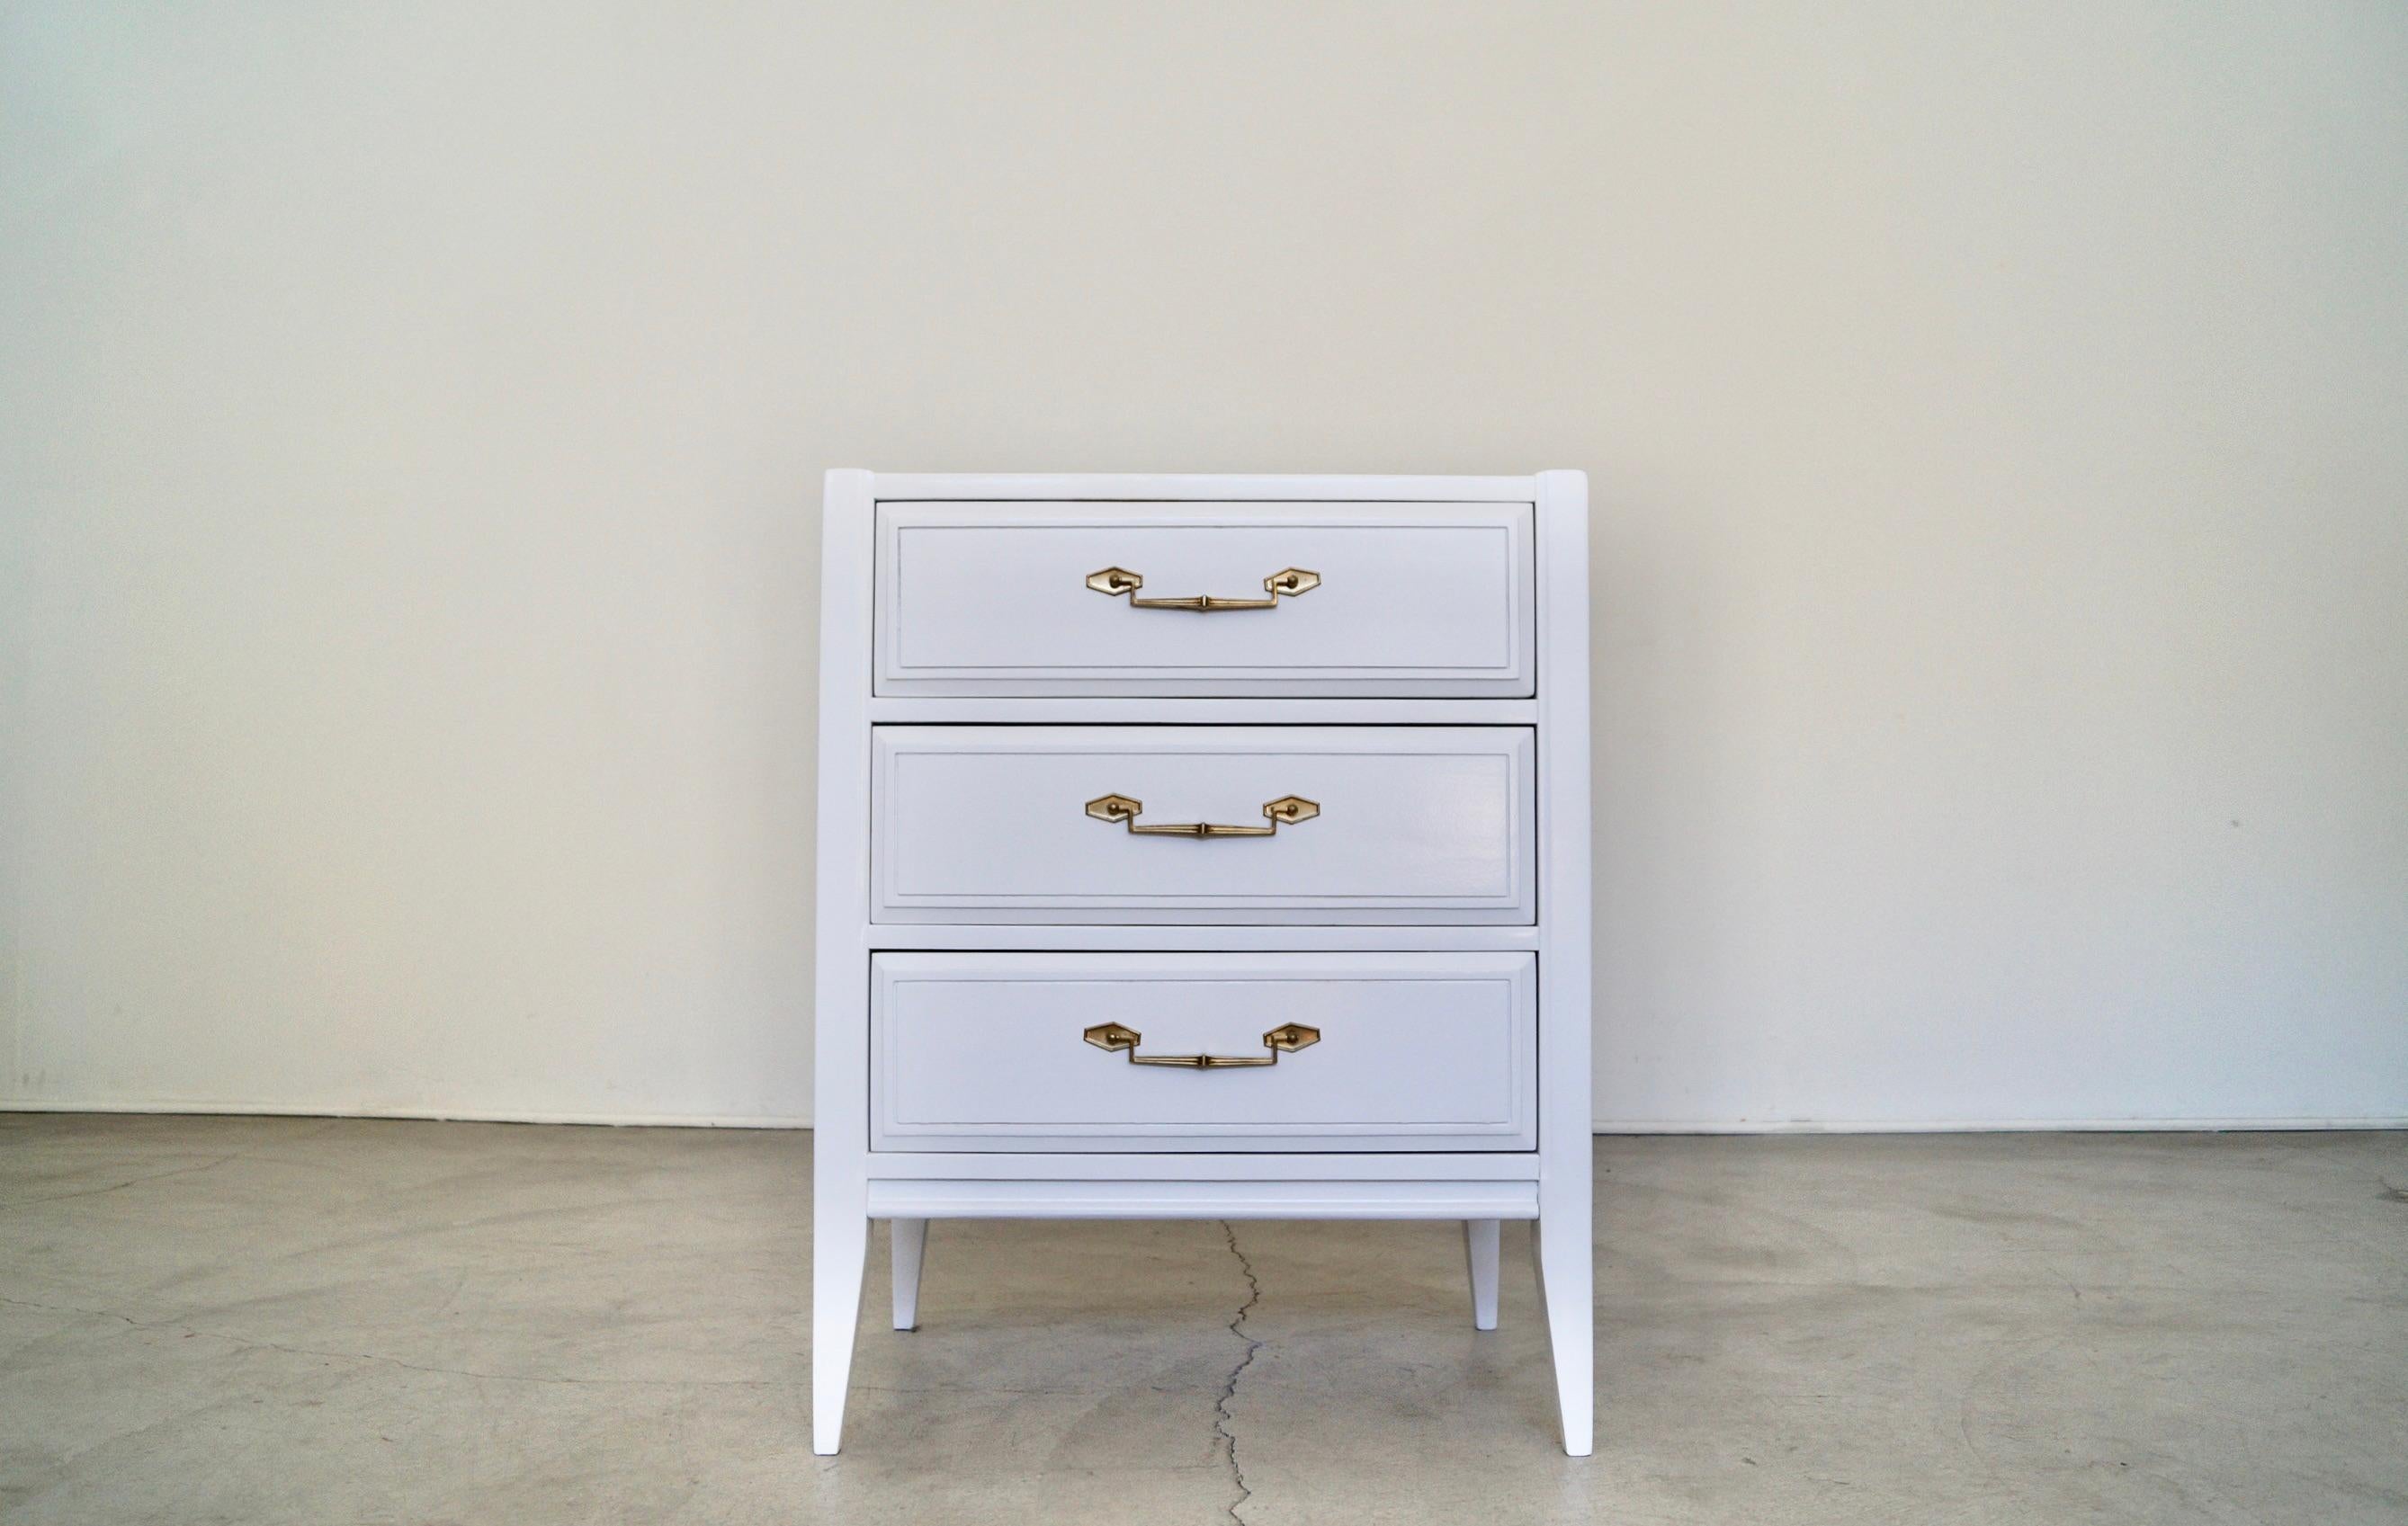 Vintage Midcentury dresser for sale. Manufactured by Basic Witz, and has been professionally refinished in white. It has the original solid brass hardware, and is a high-quality piece from the 1960’s. It has elegant clean lines with tapered legs,